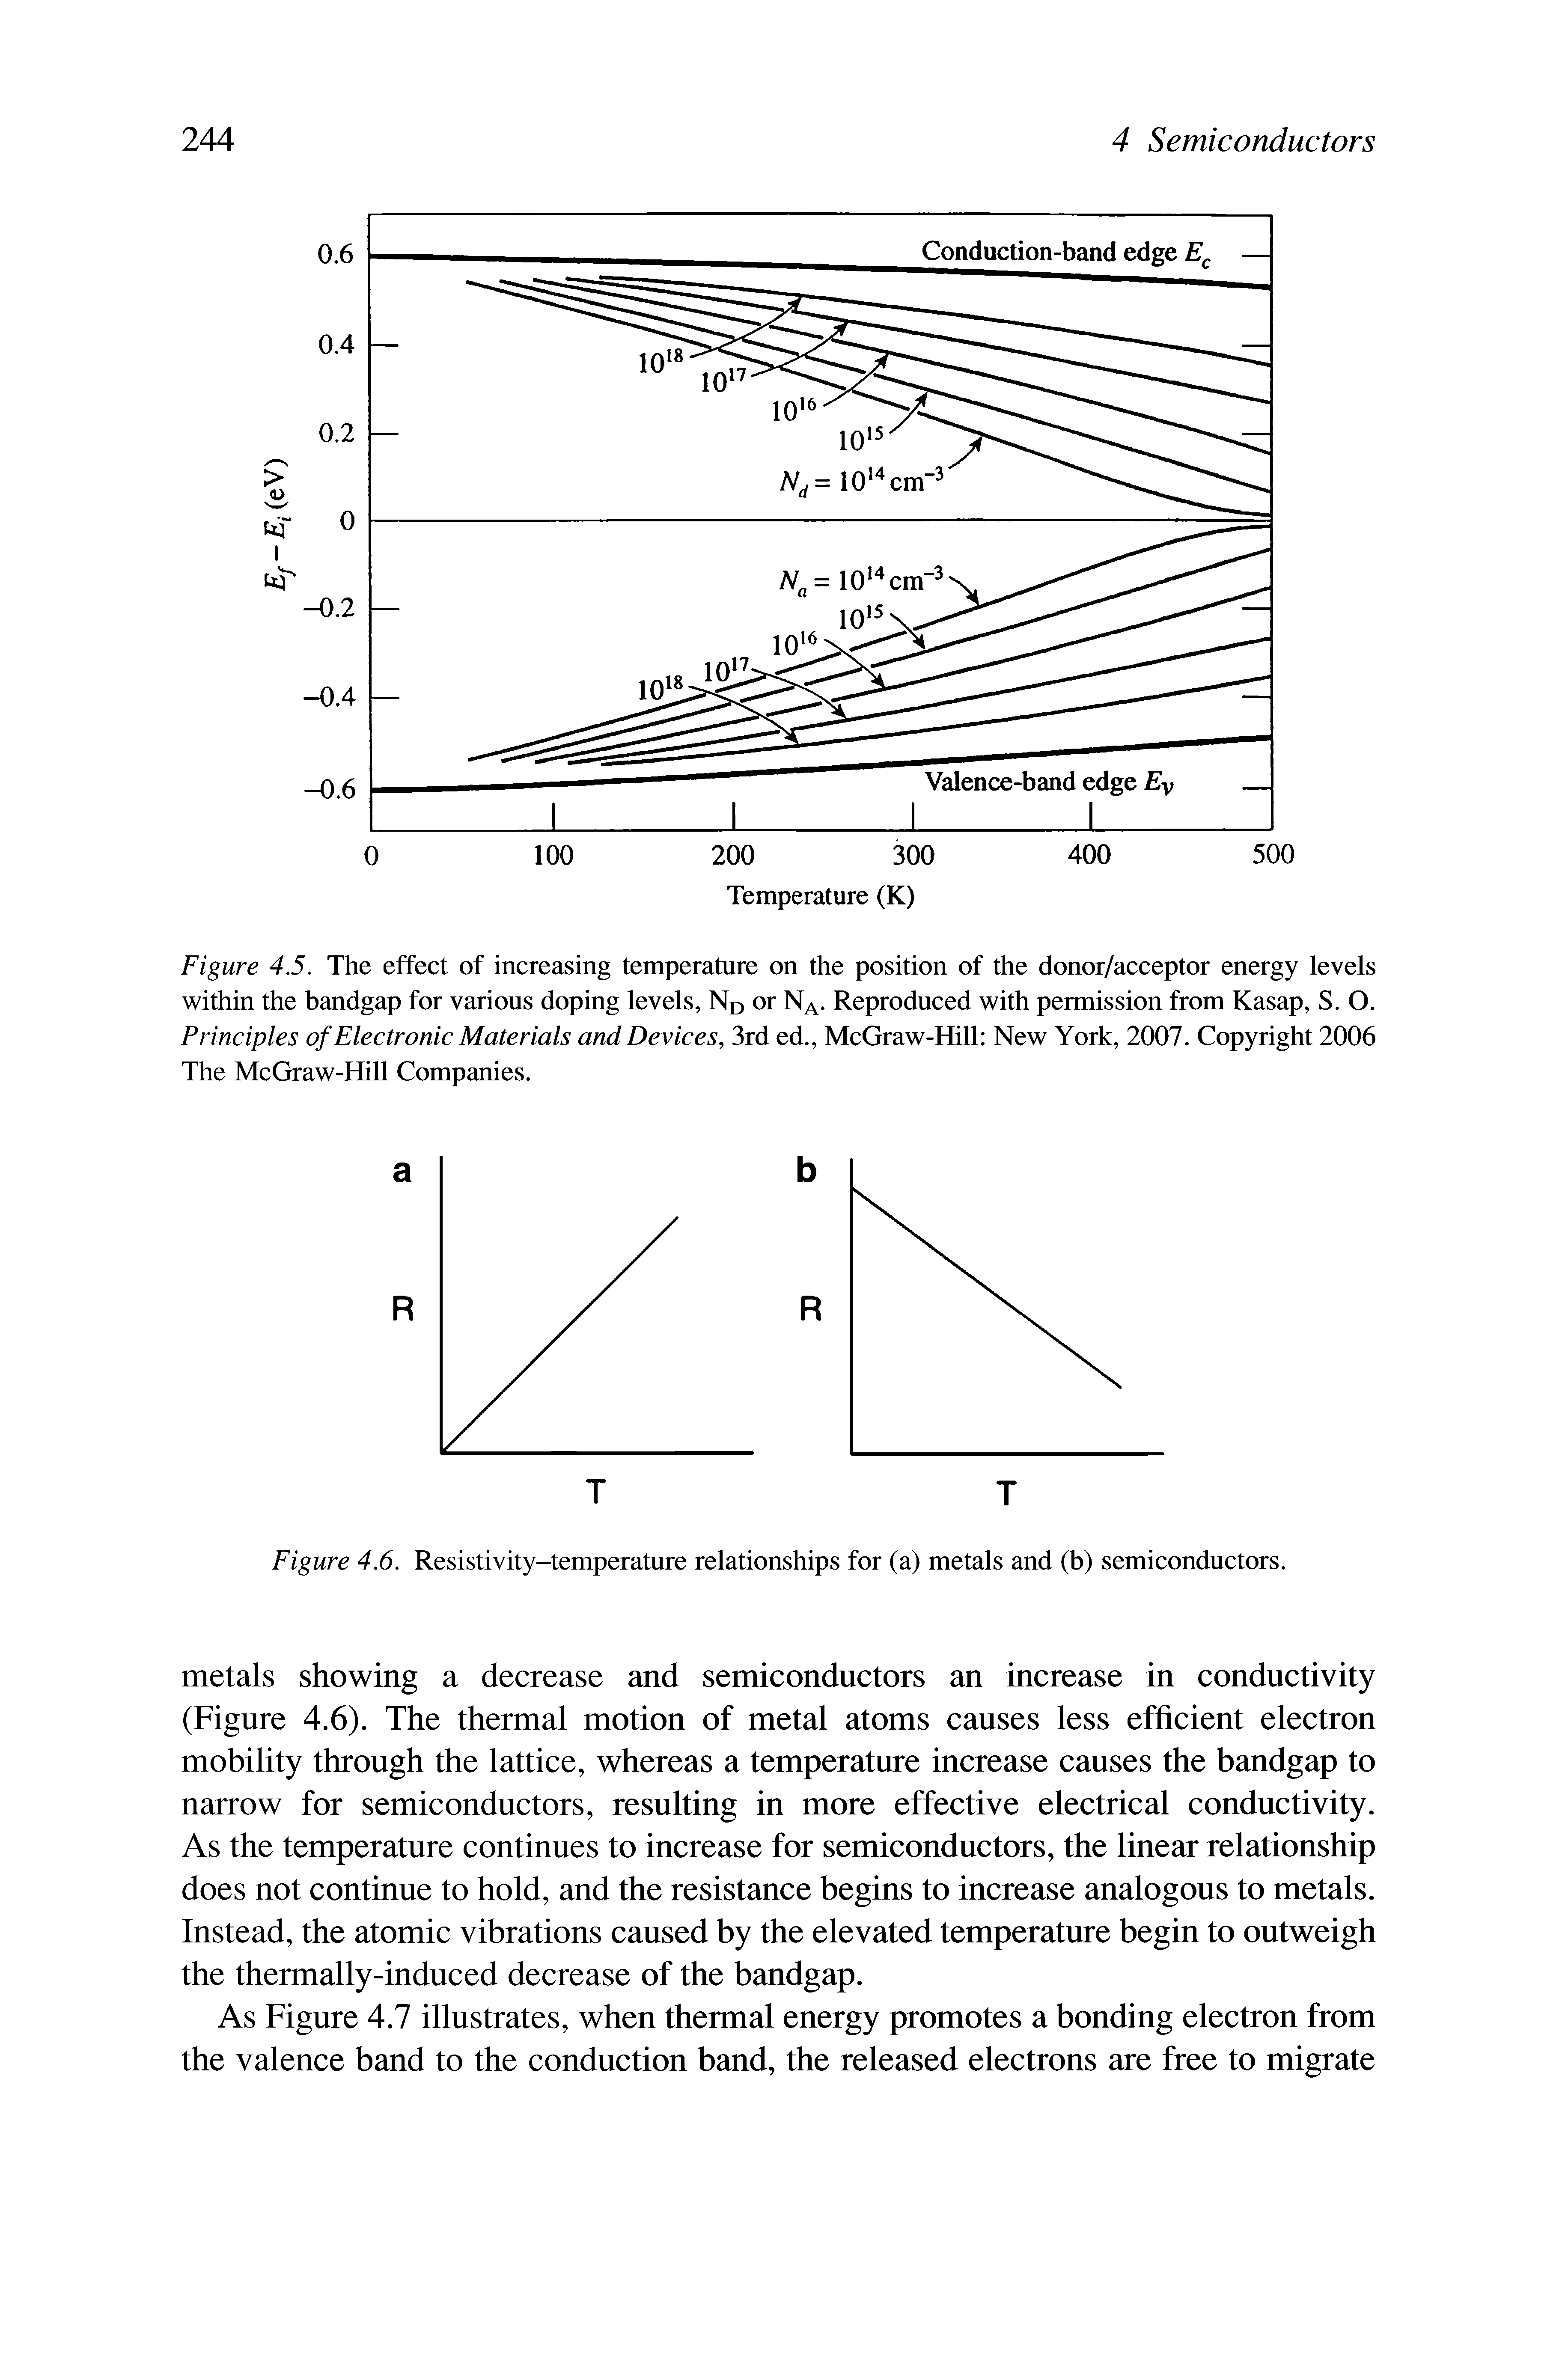 Figure 4.5. The effect of increasing temperature on the position of the donor/acceptor energy levels within the bandgap for various doping levels, Nd or Na- Reproduced with permission from Kasap, S. O. Principles of Electronic Materials and Devices, 3rd ed., McGraw-Hill New York, 2007. Copyright 2006 The McGraw-Hill Companies.